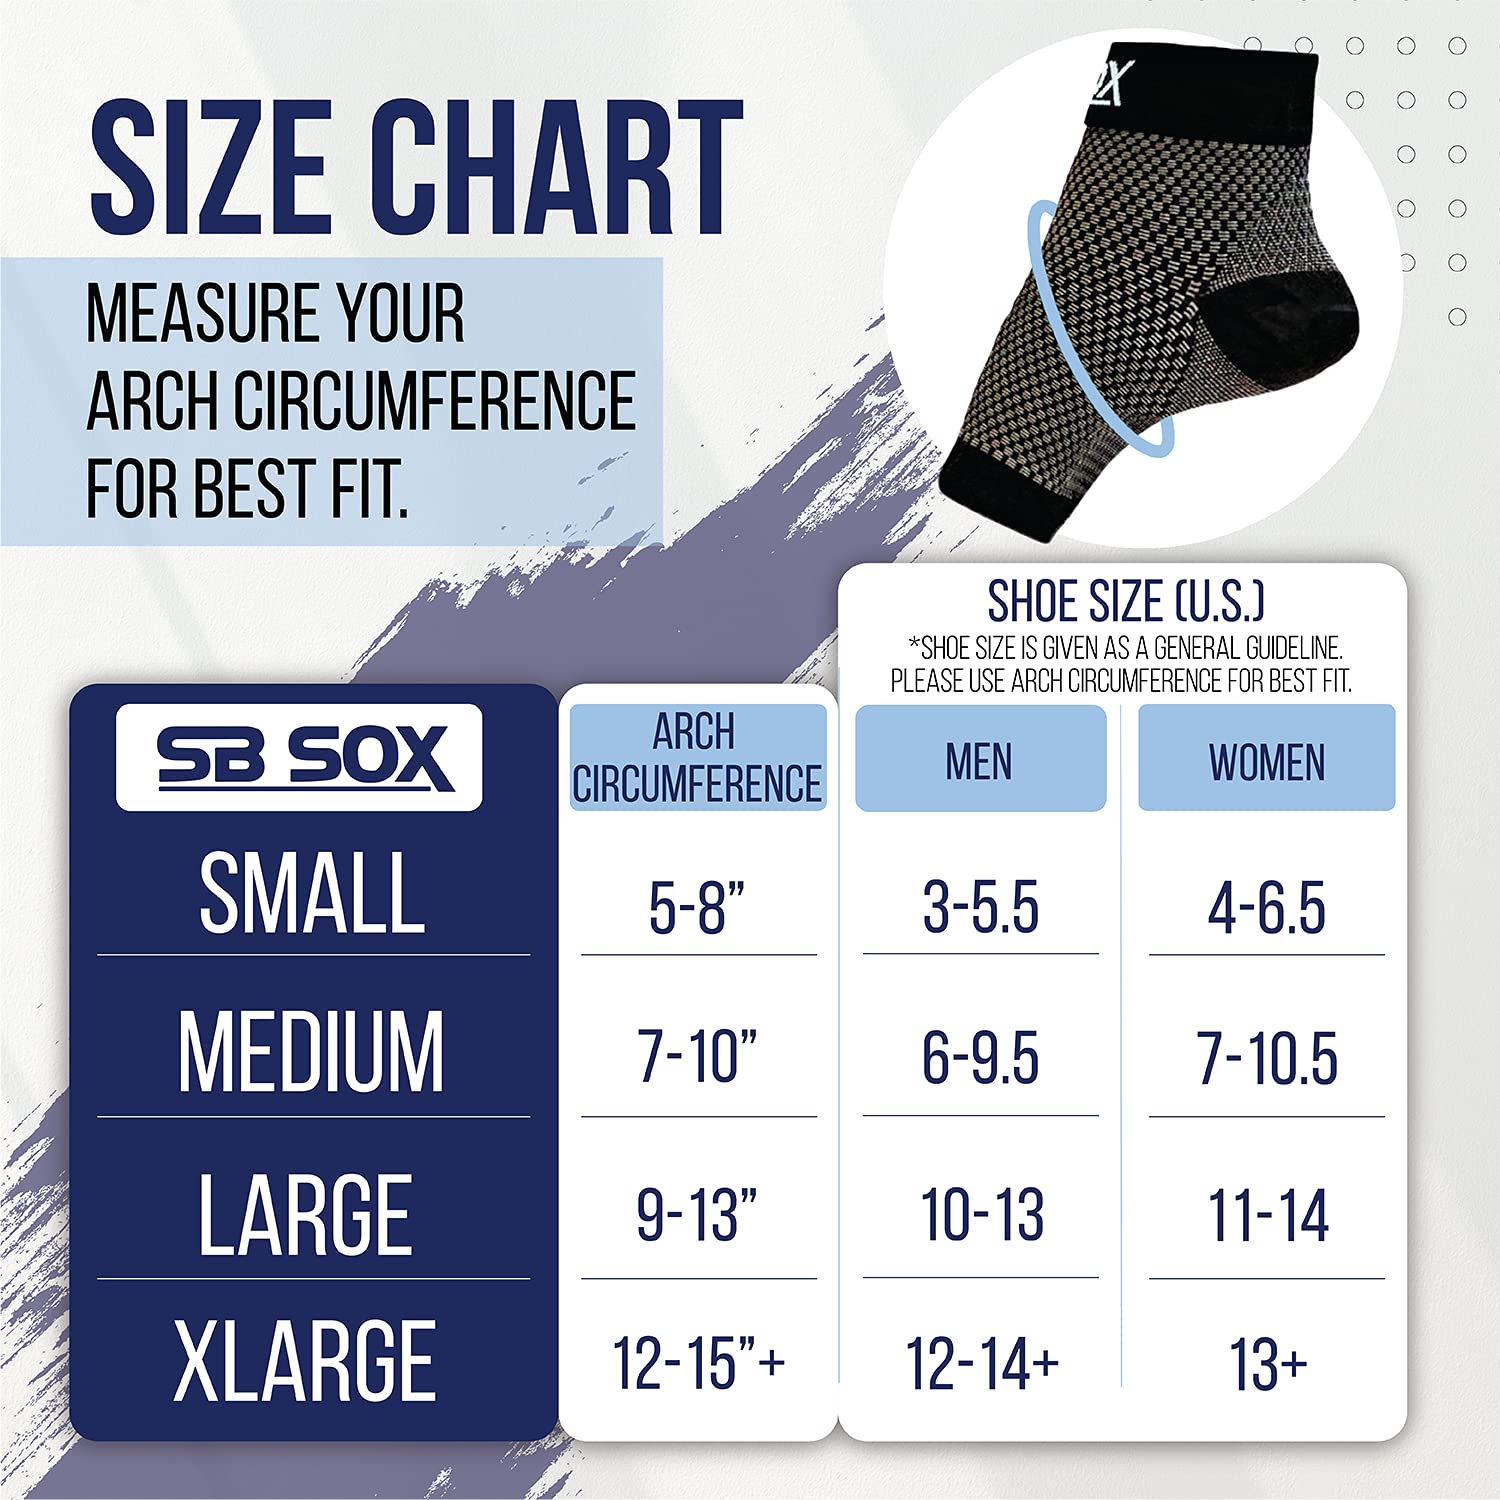 SB SOX Plantar Fasciitis Relief Socks (1 Pair) for Women & Men - Best Compression Sleeves for All Day Wear with Foot/Arch Support for Pain Relief (Black, Large)